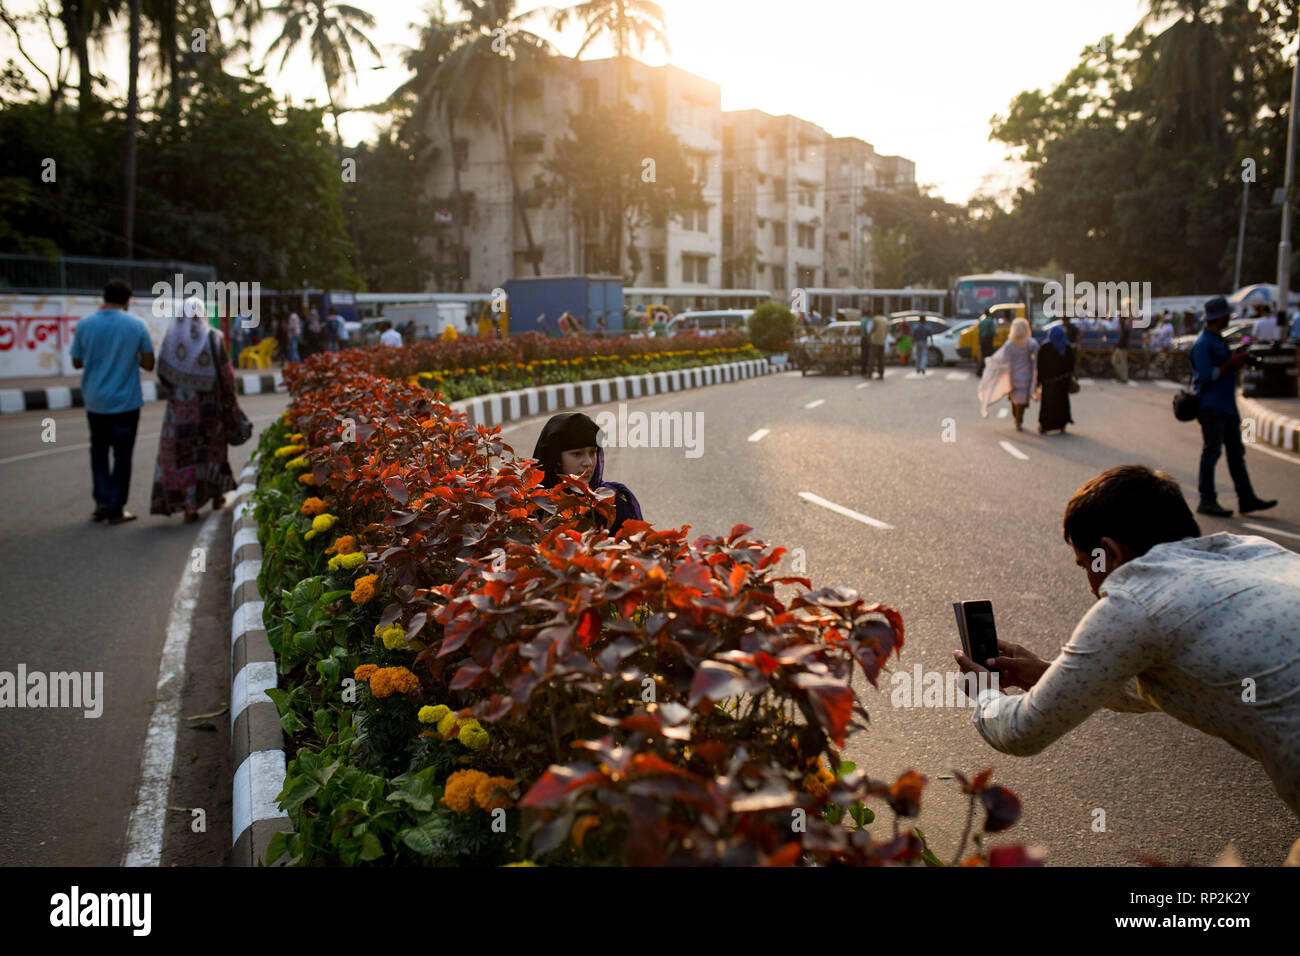 Dhaka, Bangladesh. 20th Feb, 2019.  A boy taking pictures of a girl using mobile in front of the language matyrs monument  in Dhaka, Bangladesh on February 20, 2019.  The nation will pay tribute to the Bangla language movement martyrs who sacrificed their life for their mother tongue in 1952, while the United Nations Educational Scientific and Cultural Organization (UNESCO) declared 21 February as the International Mother Language Day. Credit: zakir hossain chowdhury zakir/Alamy Live News Stock Photo